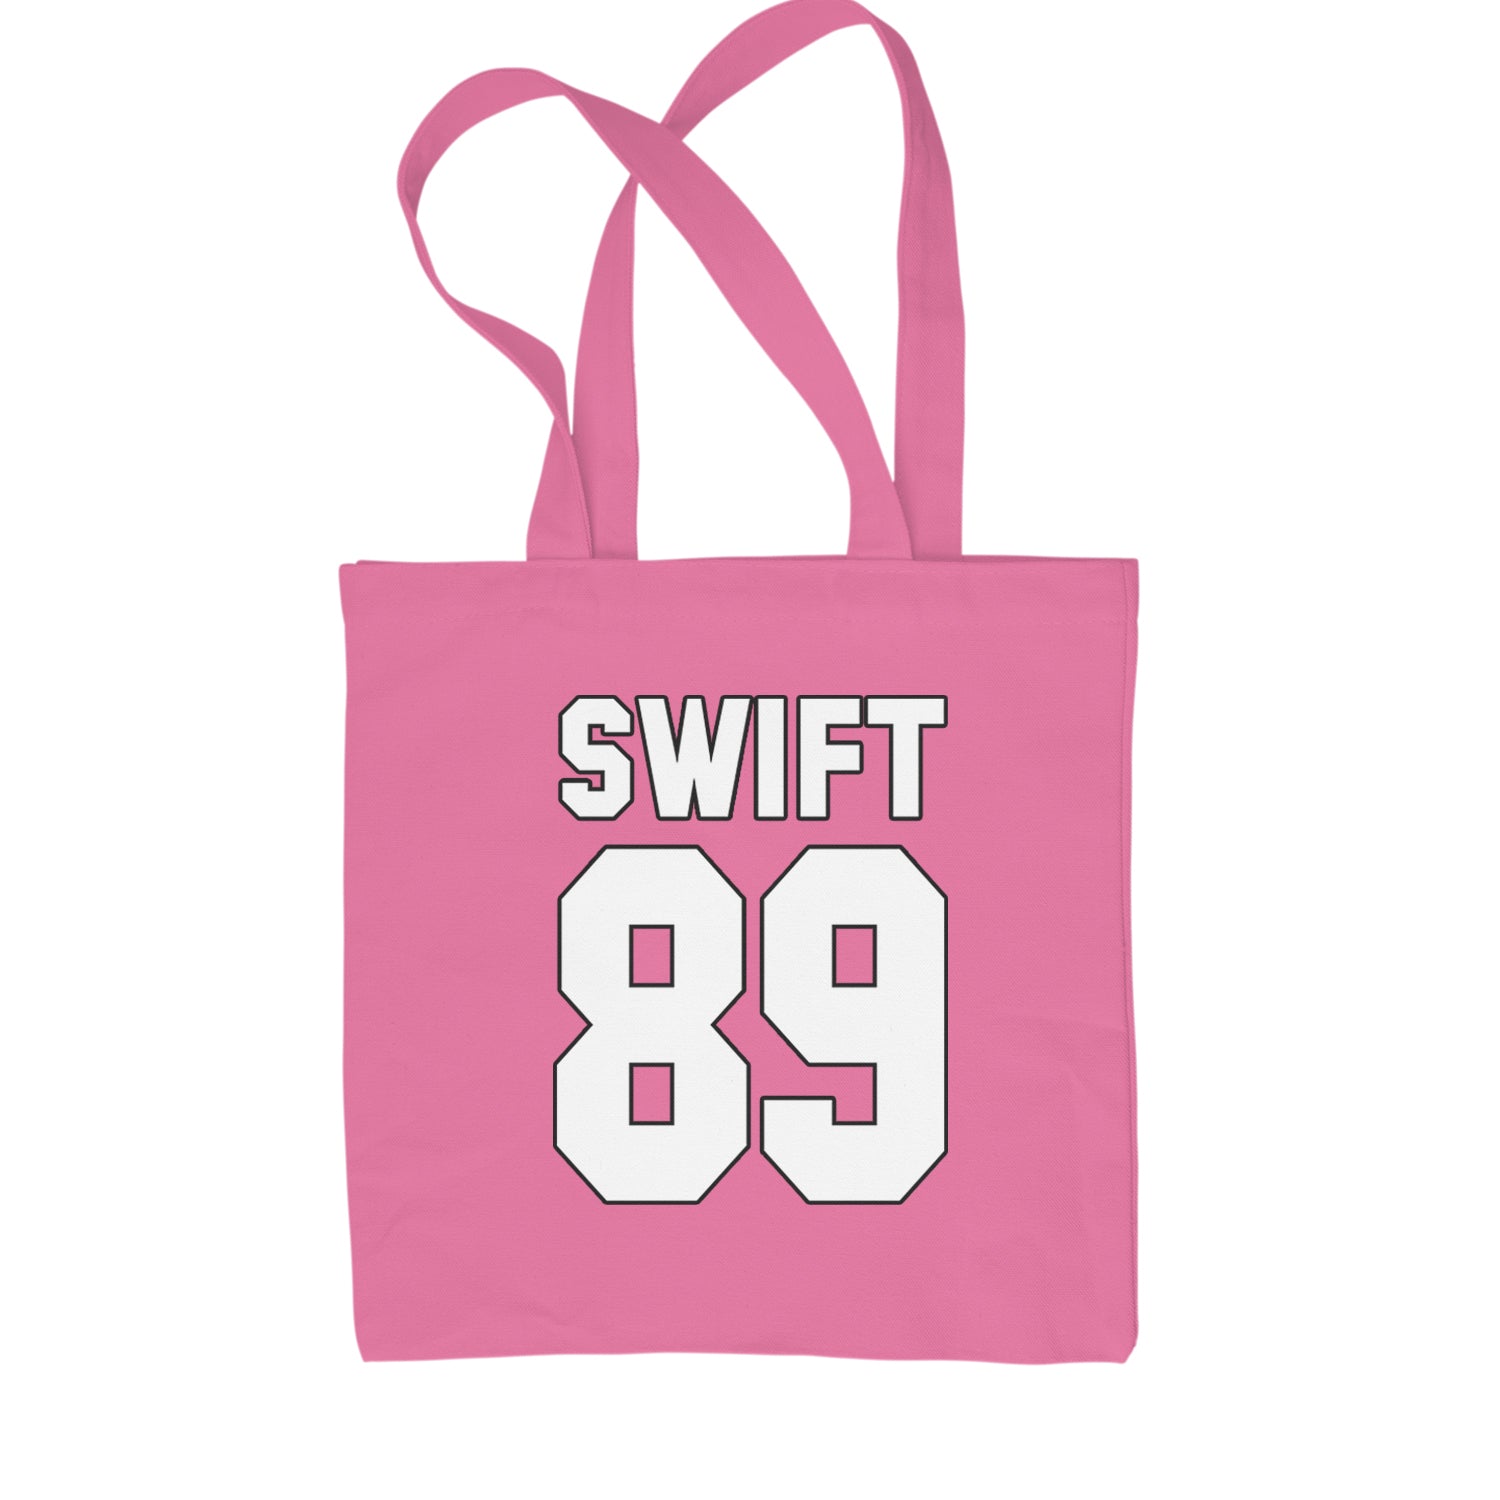 Swift 89 Birth Year Music Fan Era Poets Department Lover Shopping Tote Bag